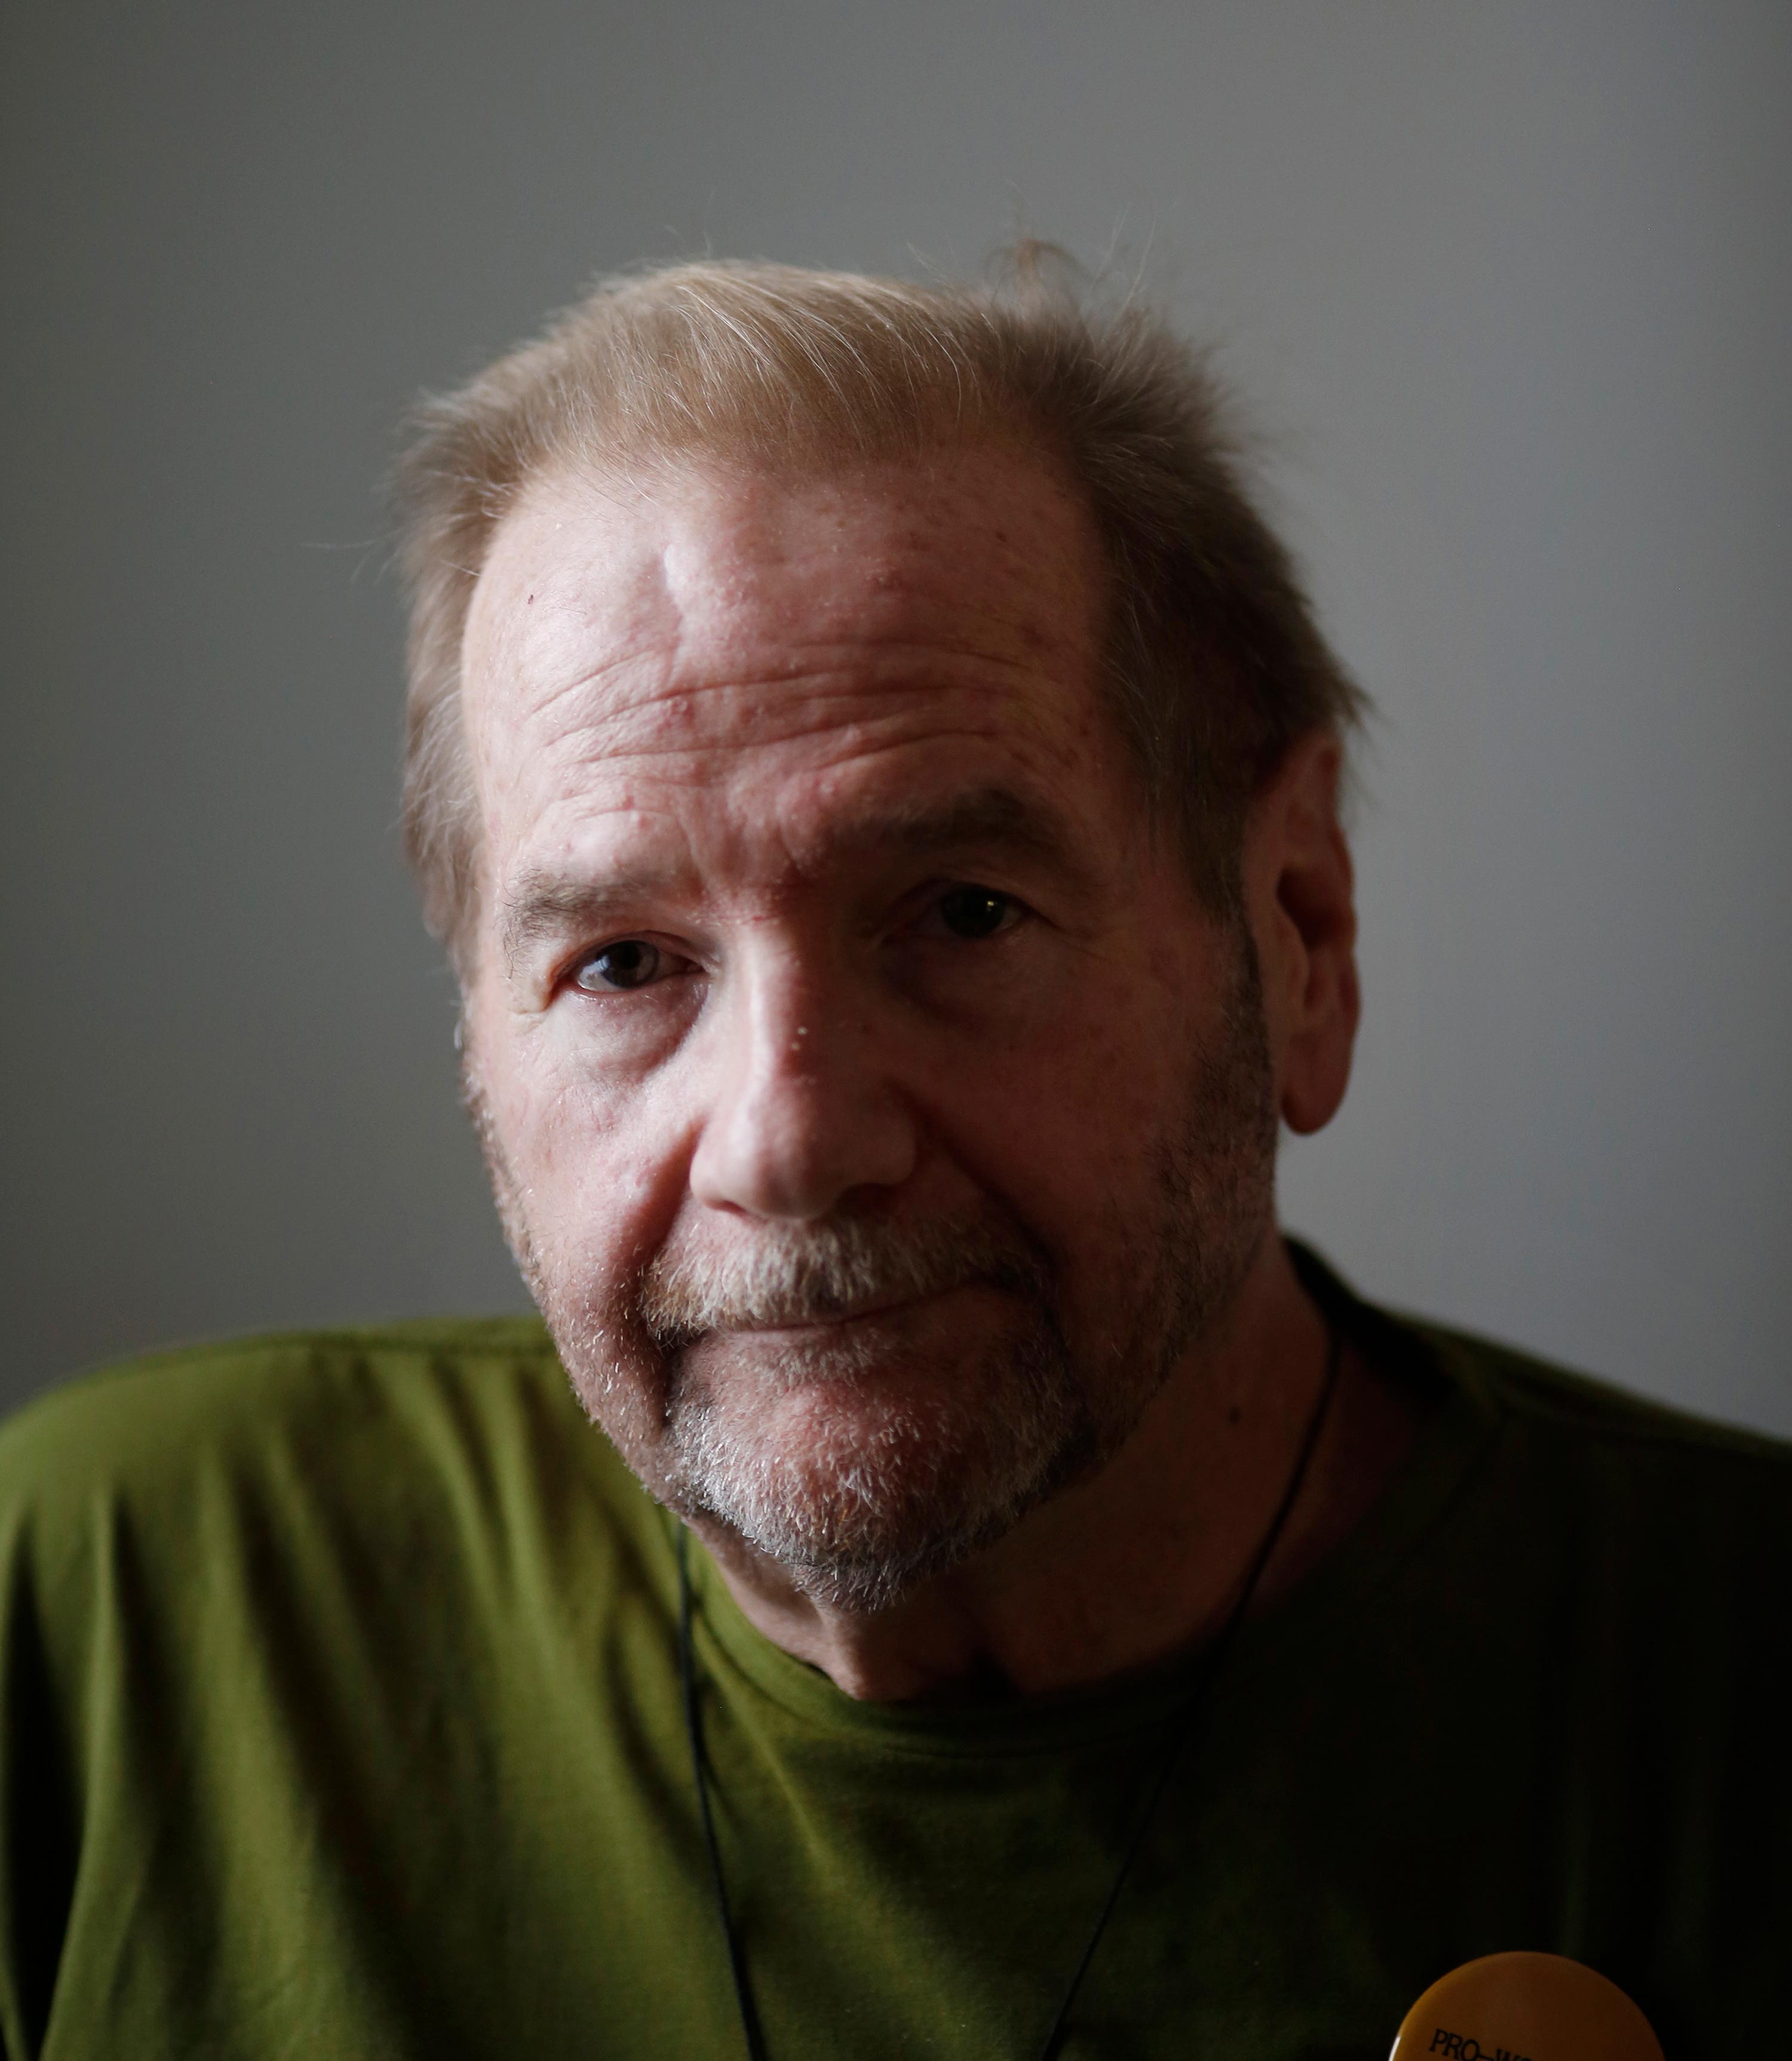 A photo shows Jerry Bilinski posing for a portrait by a window, casting the right side of his face in shadow.